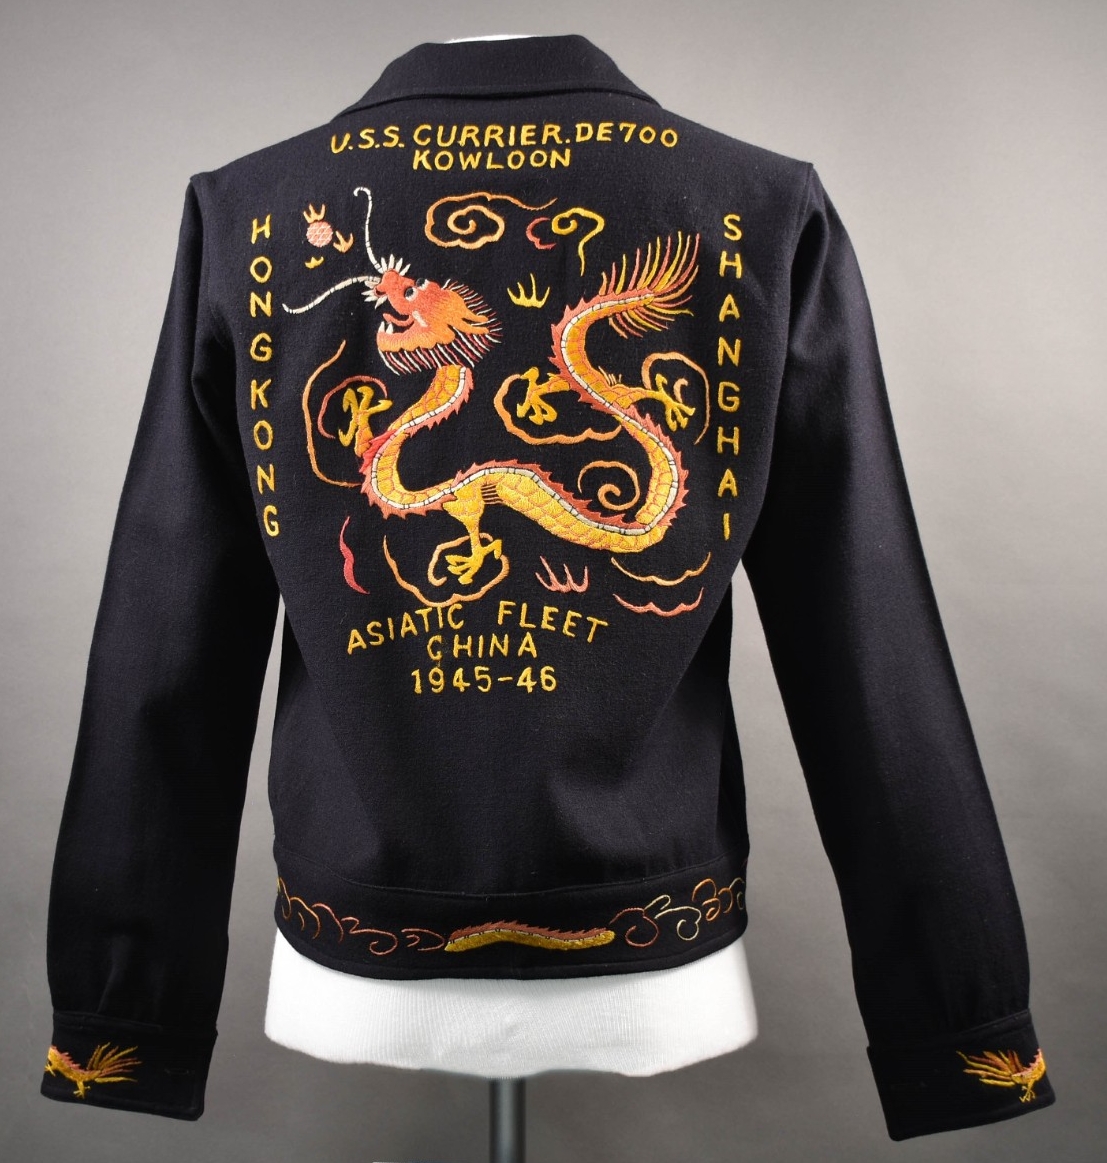 The back of the blue wool cruise jacket decorated with colorful embroidery. At the center of the back is a large colorful embroidered Asian-style dragon. Embroidered in yellow around the edges of the image is “U.S.S. Currier. DE700 / Hong Kong / ...